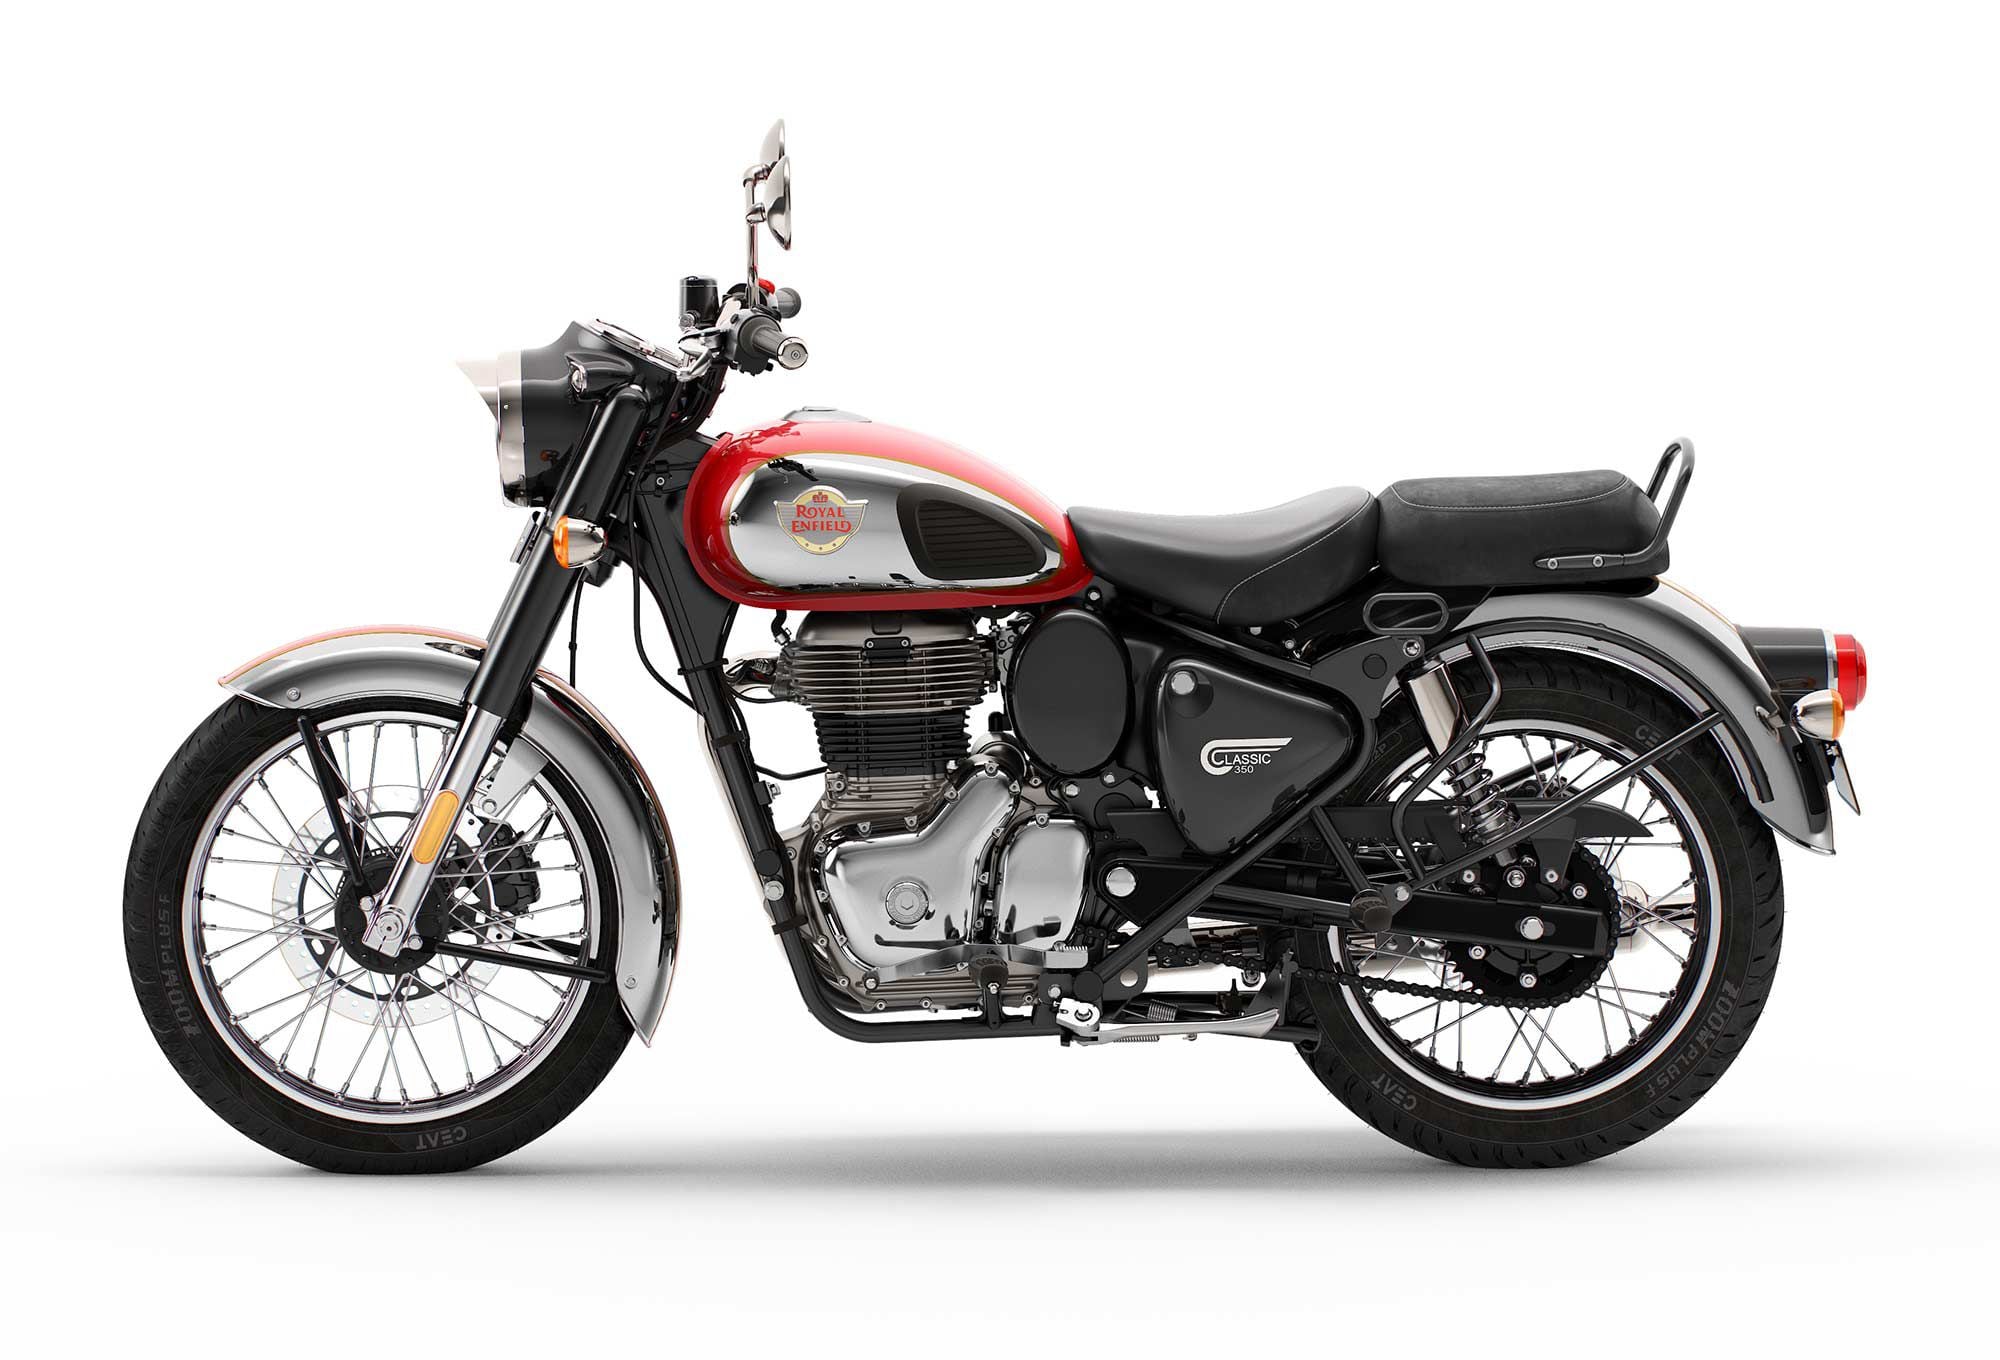 The Royal Enfield Classic 350 is available in nine colors. The matte-finished Dark Stealth Black and Dark Gunmetal Grey models feature 10-spoke alloy wheels and retail for $4,599. The Signals Desert Sand and Signals Marsh Grey models ($4,599) have military-inspired paint schemes and spoked wheels. Later this year, Royal Enfield will import the Halcyon series models which feature retro-inspired graphics for $4,499. The Chrome Red and Chrome Brown models ($4,699), which look particularly fetching in photos, are also forthcoming.